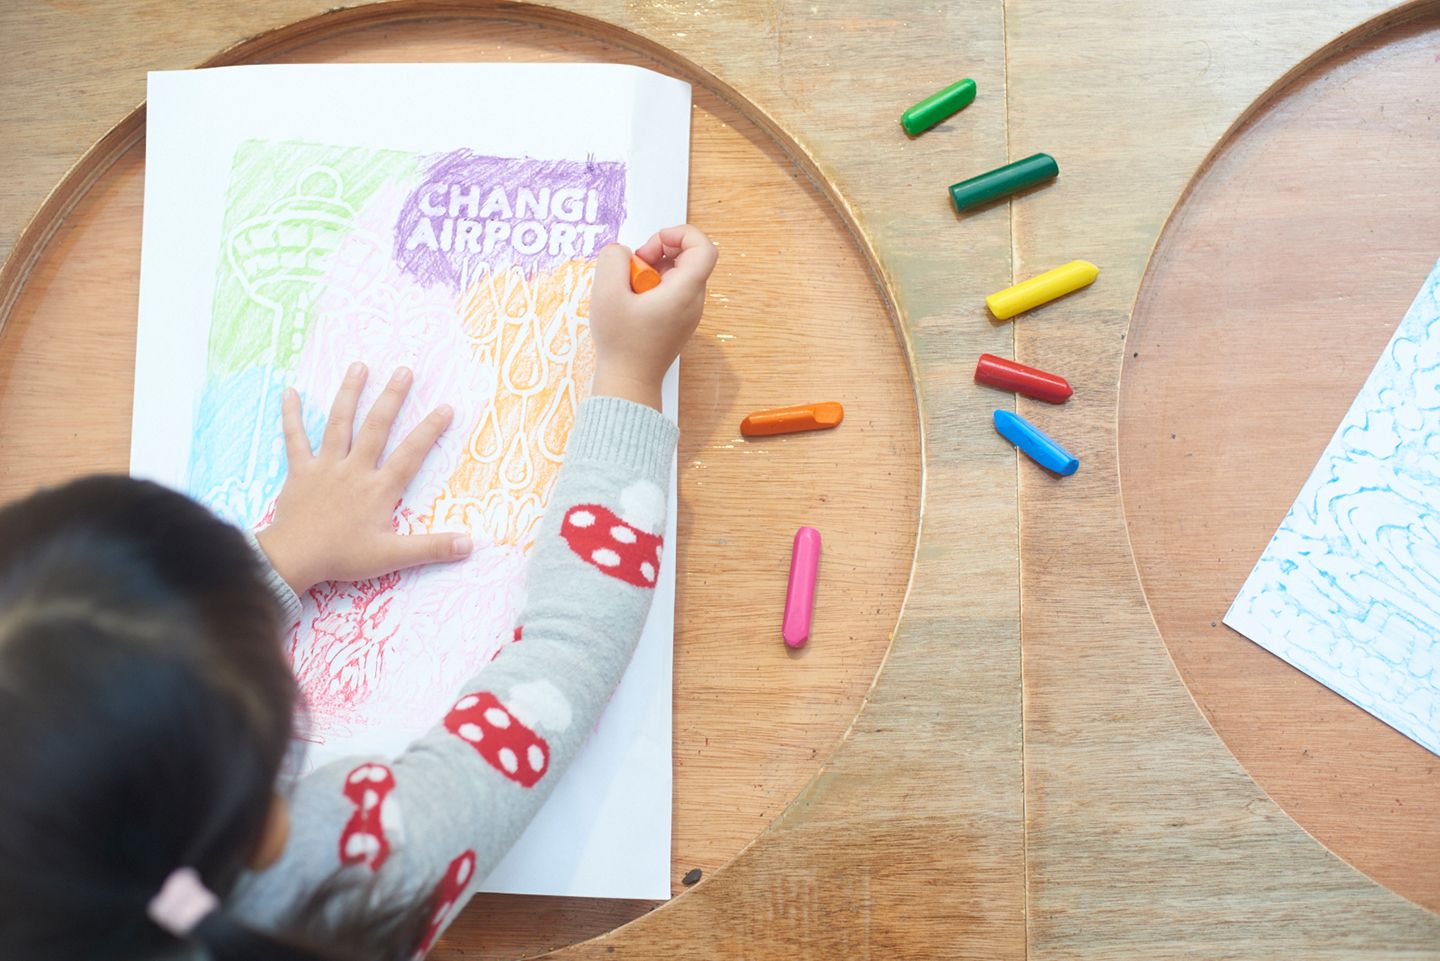 A child colouring a drawing with crayons